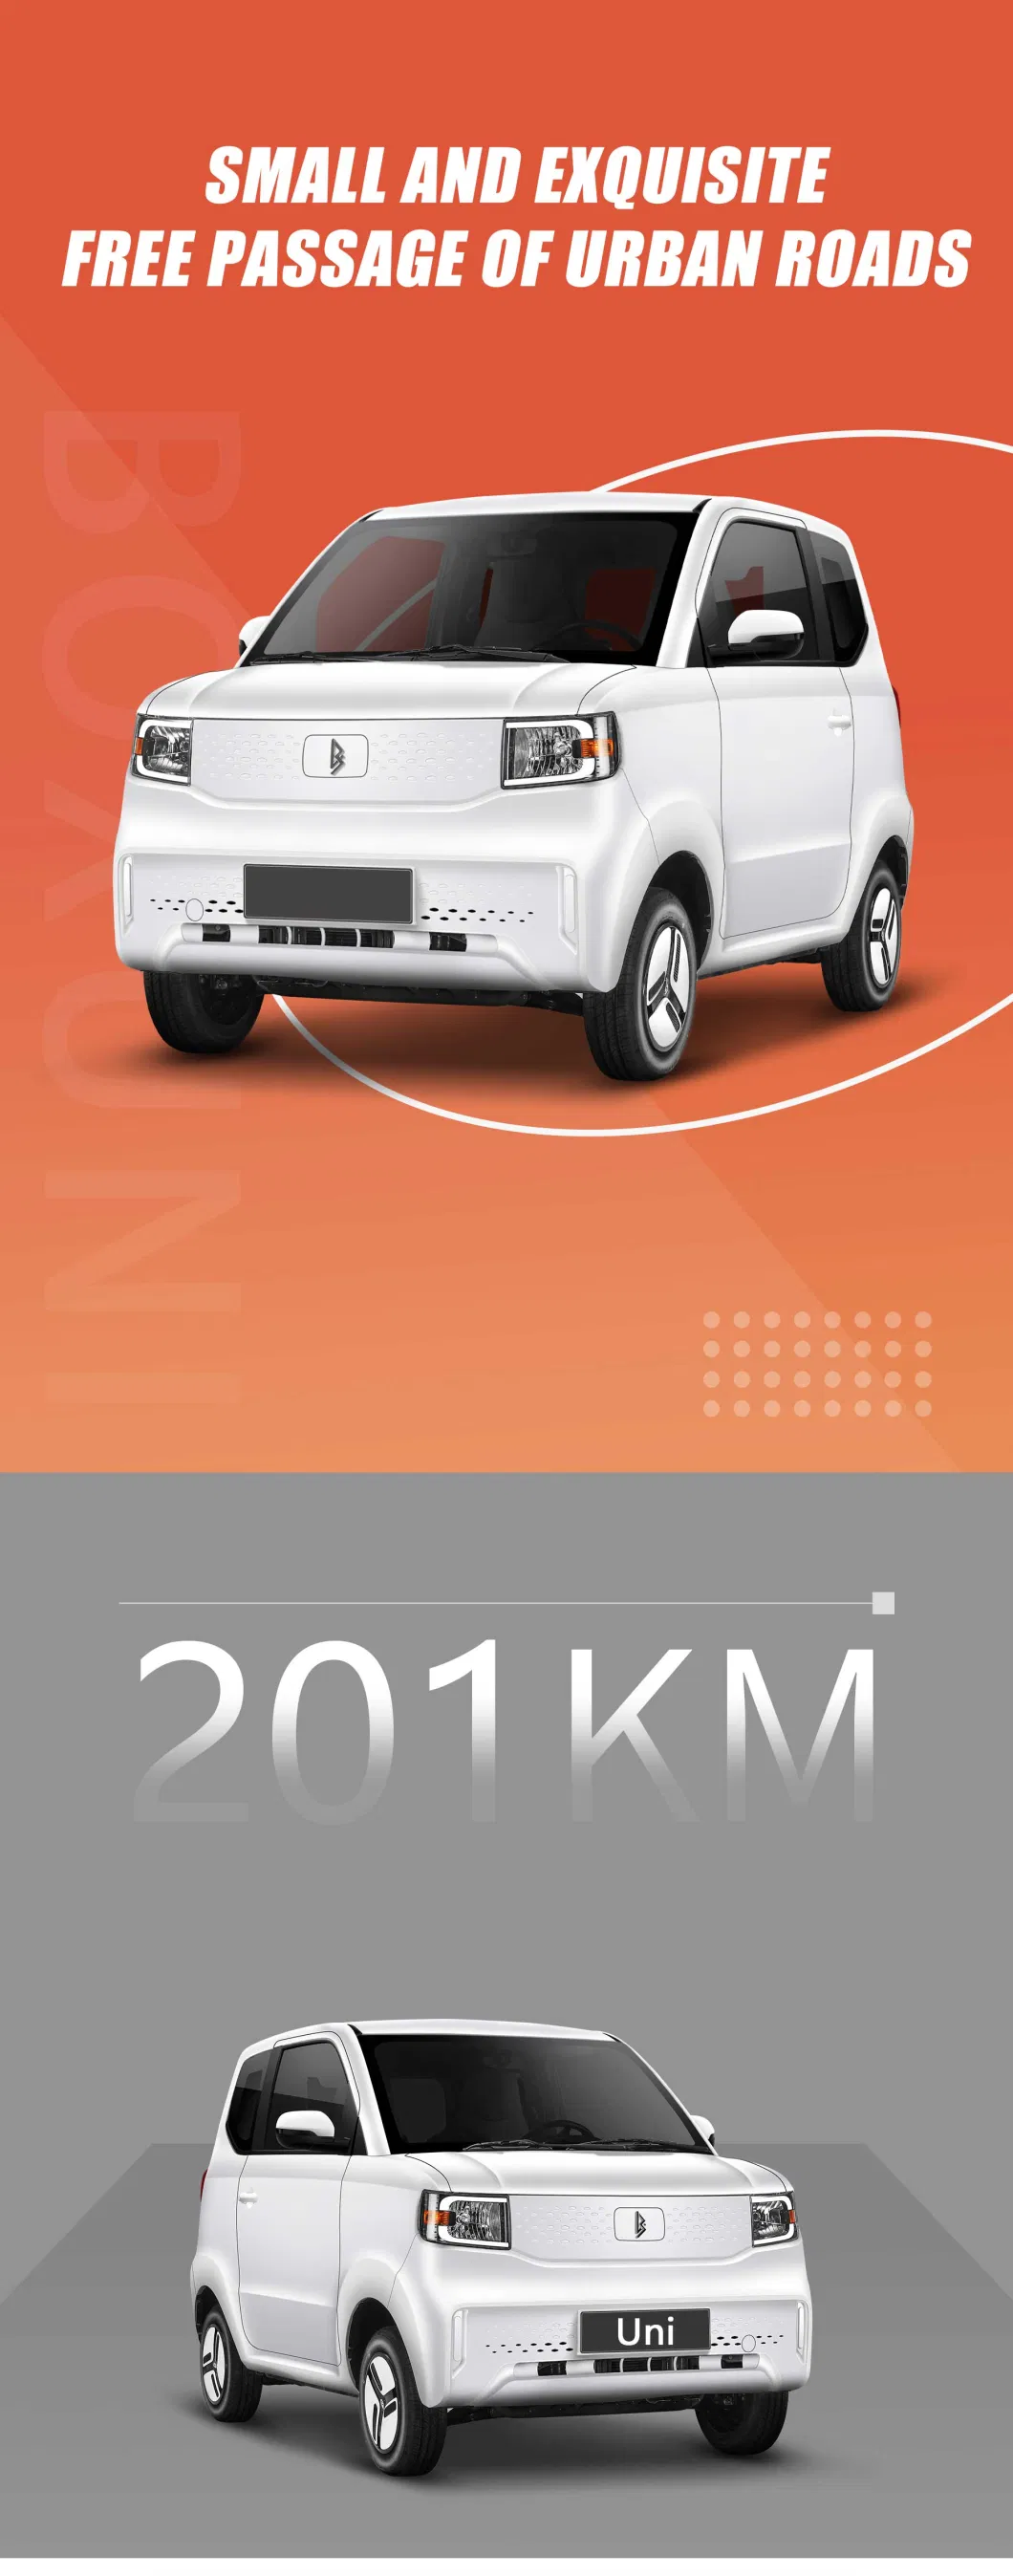 2023 New Energy Vehicle China High Speed Mini Electric Car with Stylish and Modern Design Reverse Image 201km Long Range 2-Door 4-Seater Commuting Vehicle